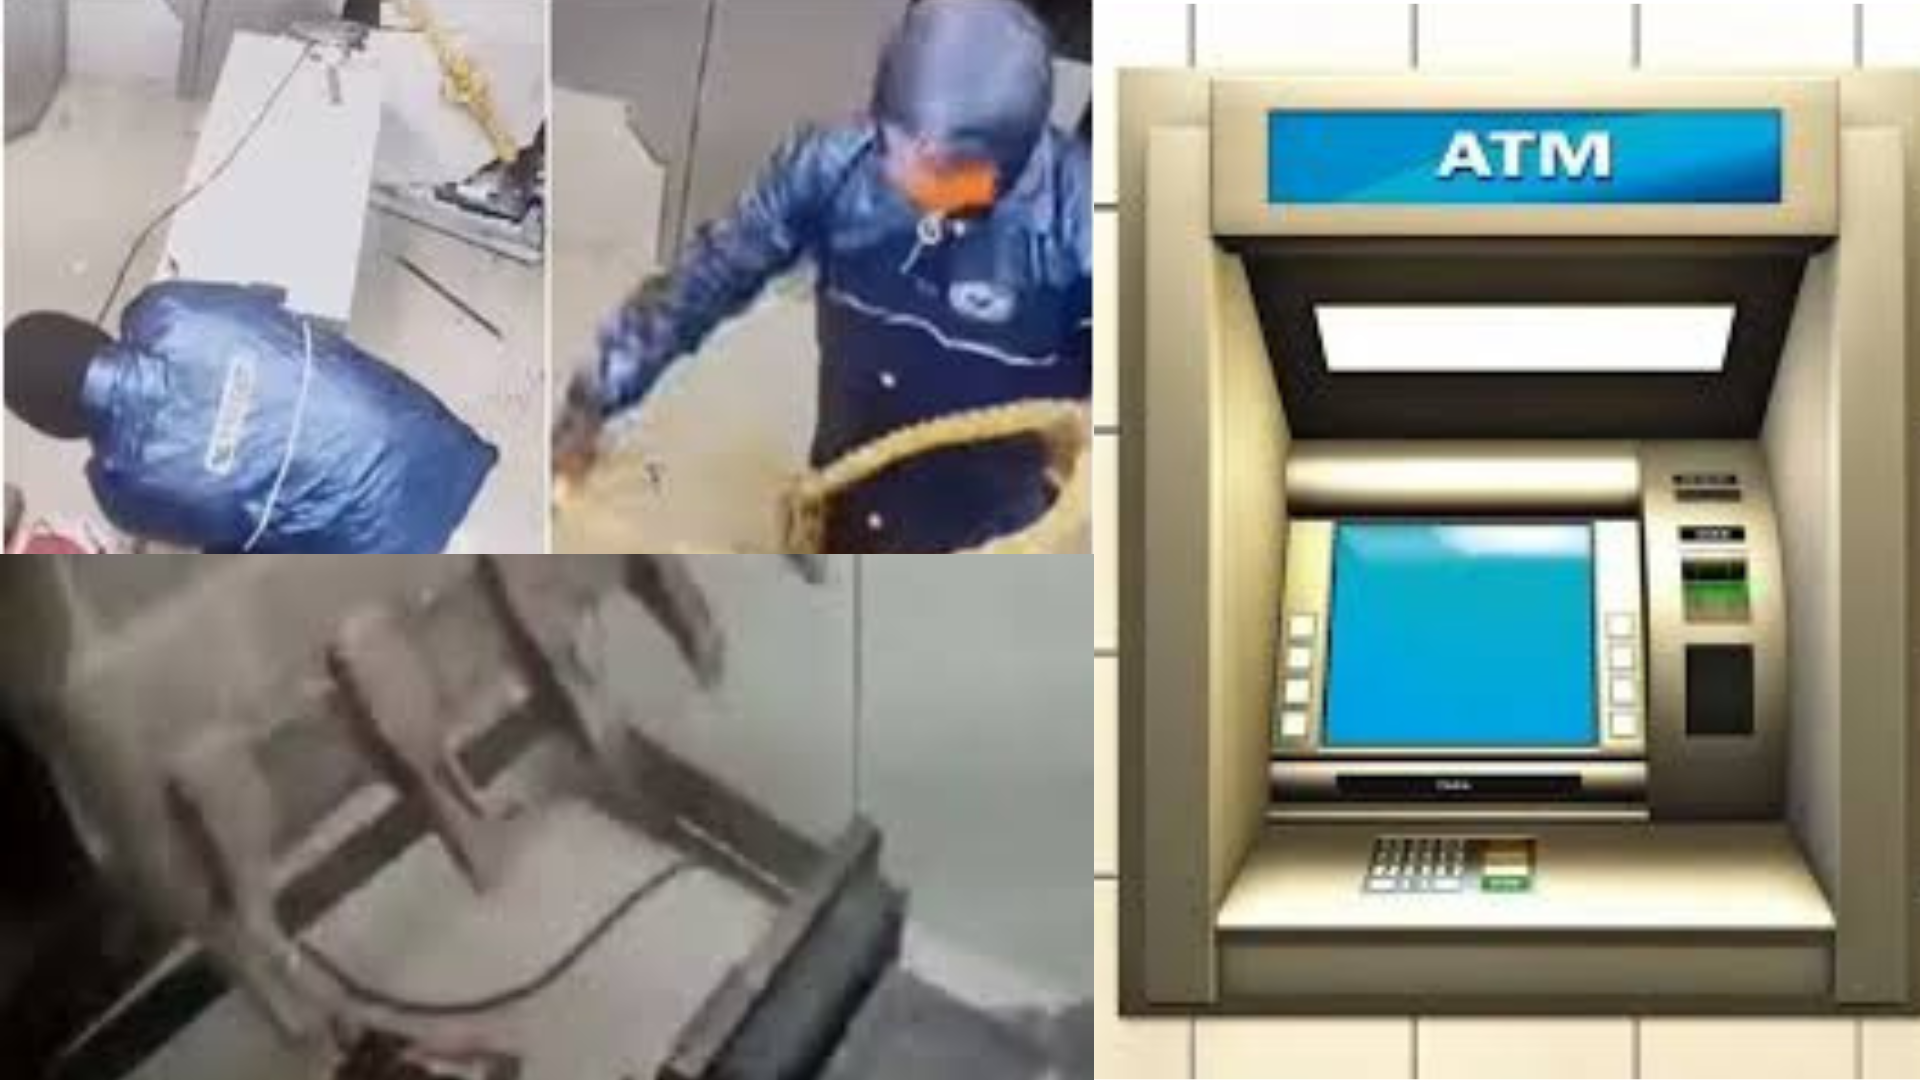 Watch: Thieves Use Ropes to Steal ATM, Police Recover How Much?